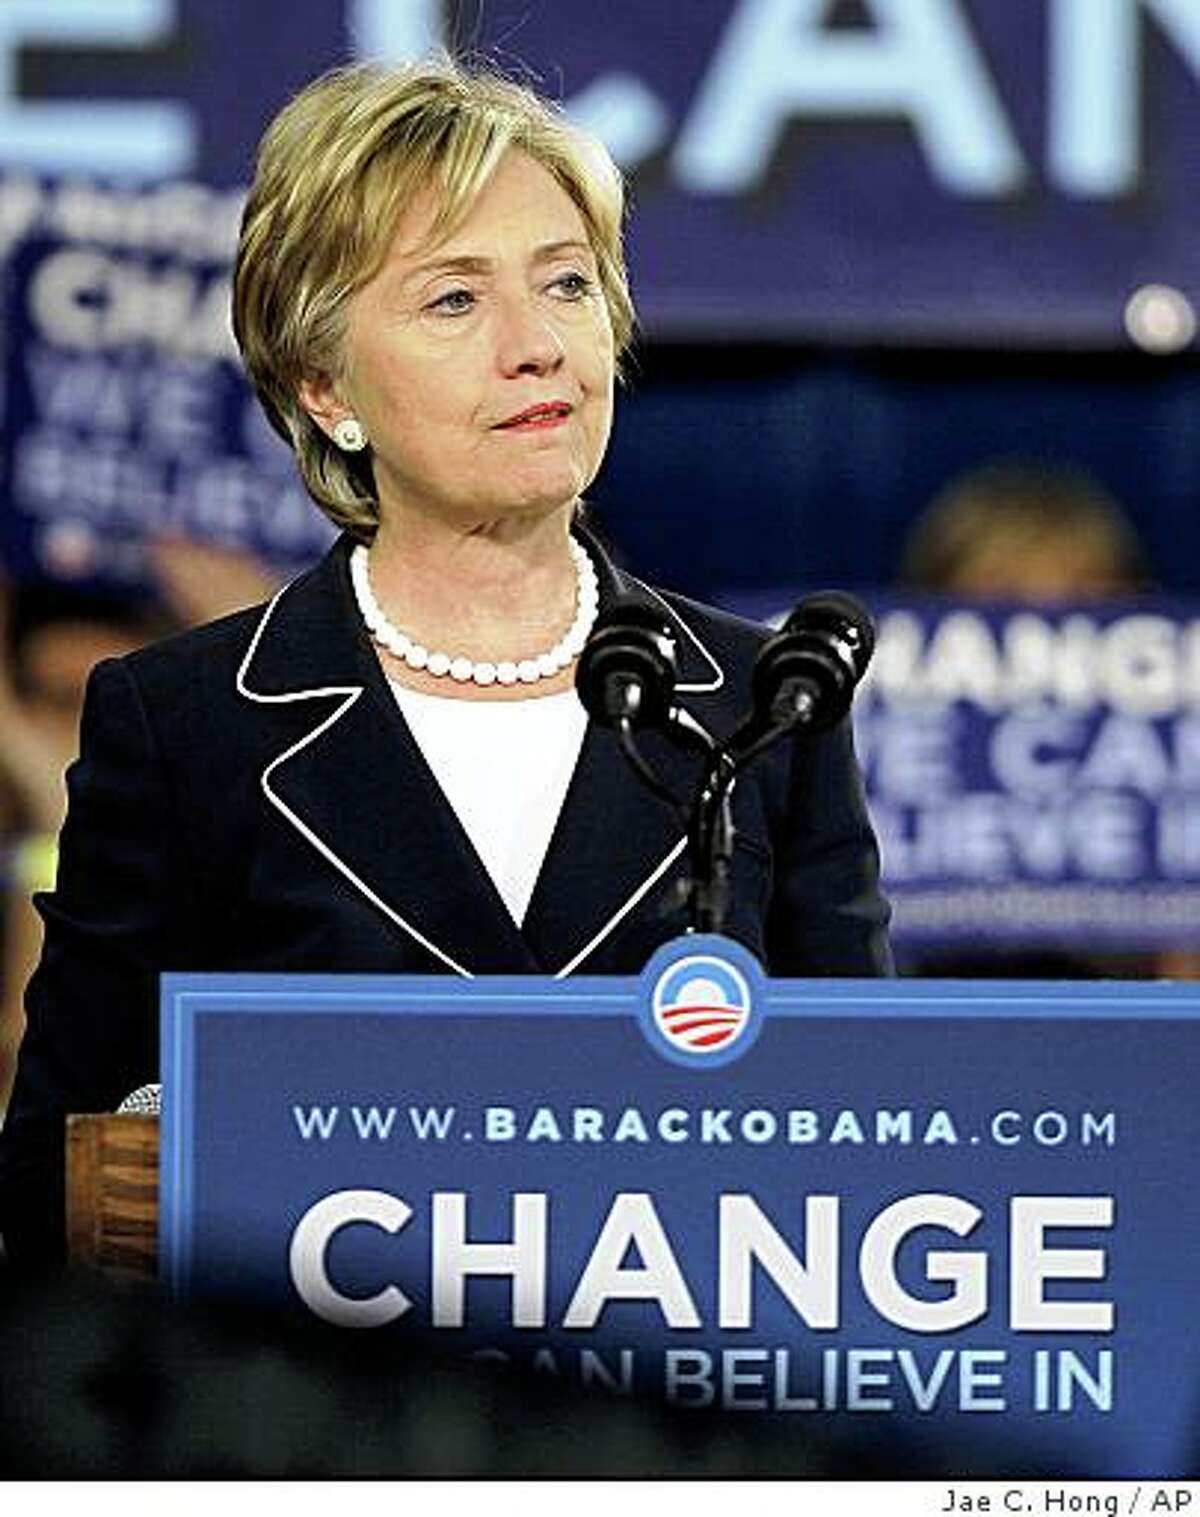 Sen. Hillary Rodham Clinton, D-N.Y., pauses for a moment while speaking at a campaign stop for Democratic presidential candidate, Sen. Barack Obama, D-Ill., Friday, Aug. 8, 2008, in Henderson, Nev. (AP Photo/Jae C. Hong)